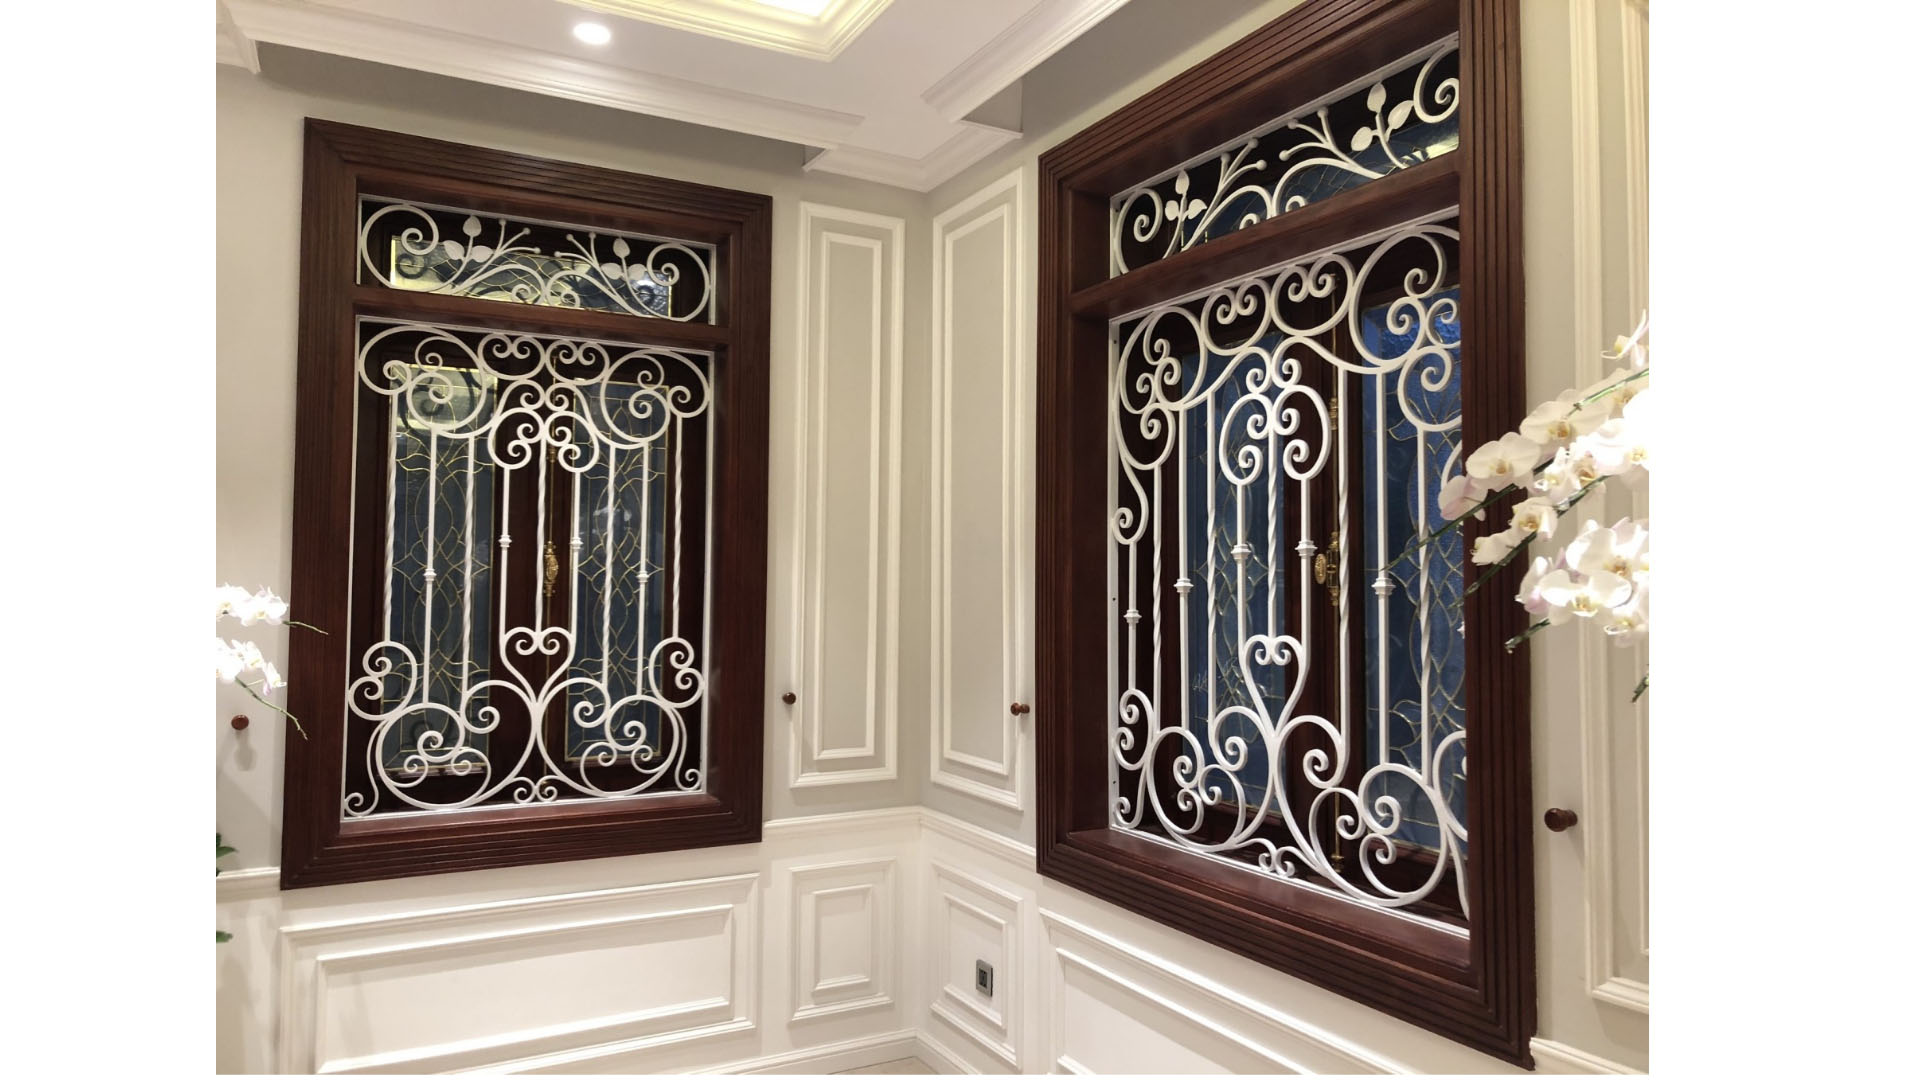 https://www.nguyenphongcnc.com/assets/images/gallery/wrought-iron-grille-wrought-iron-window-grill.jpg